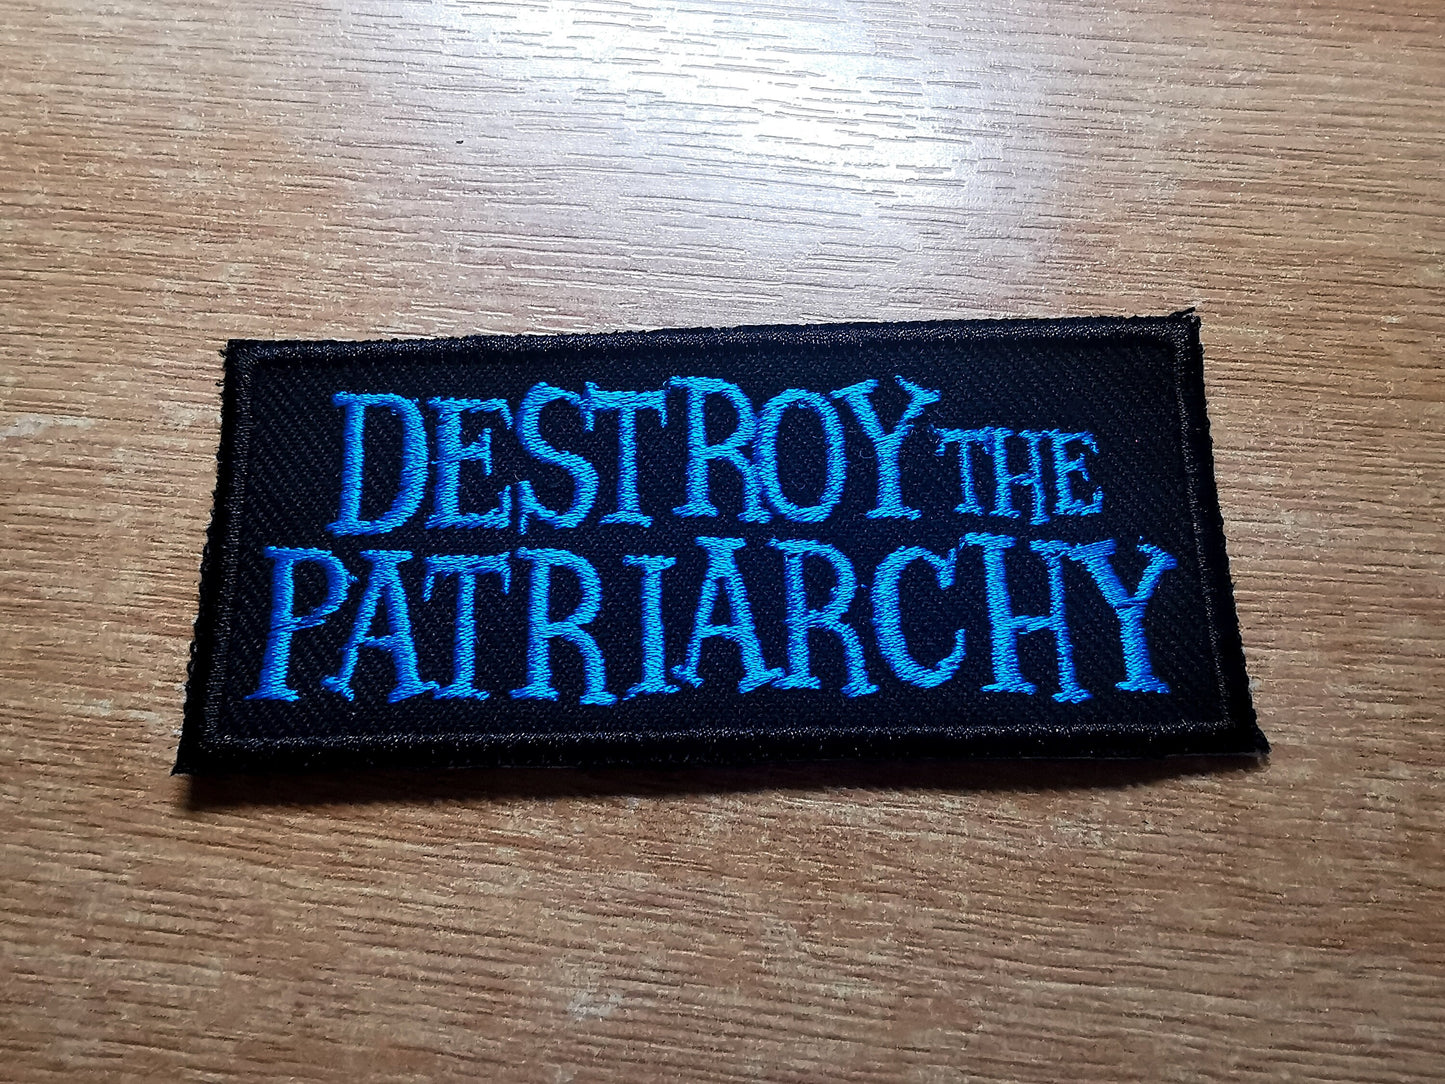 Destroy the Patriarchy Iron On Embroidered Patch Blue Feminist and Feminism anti-misogyny Protest patches